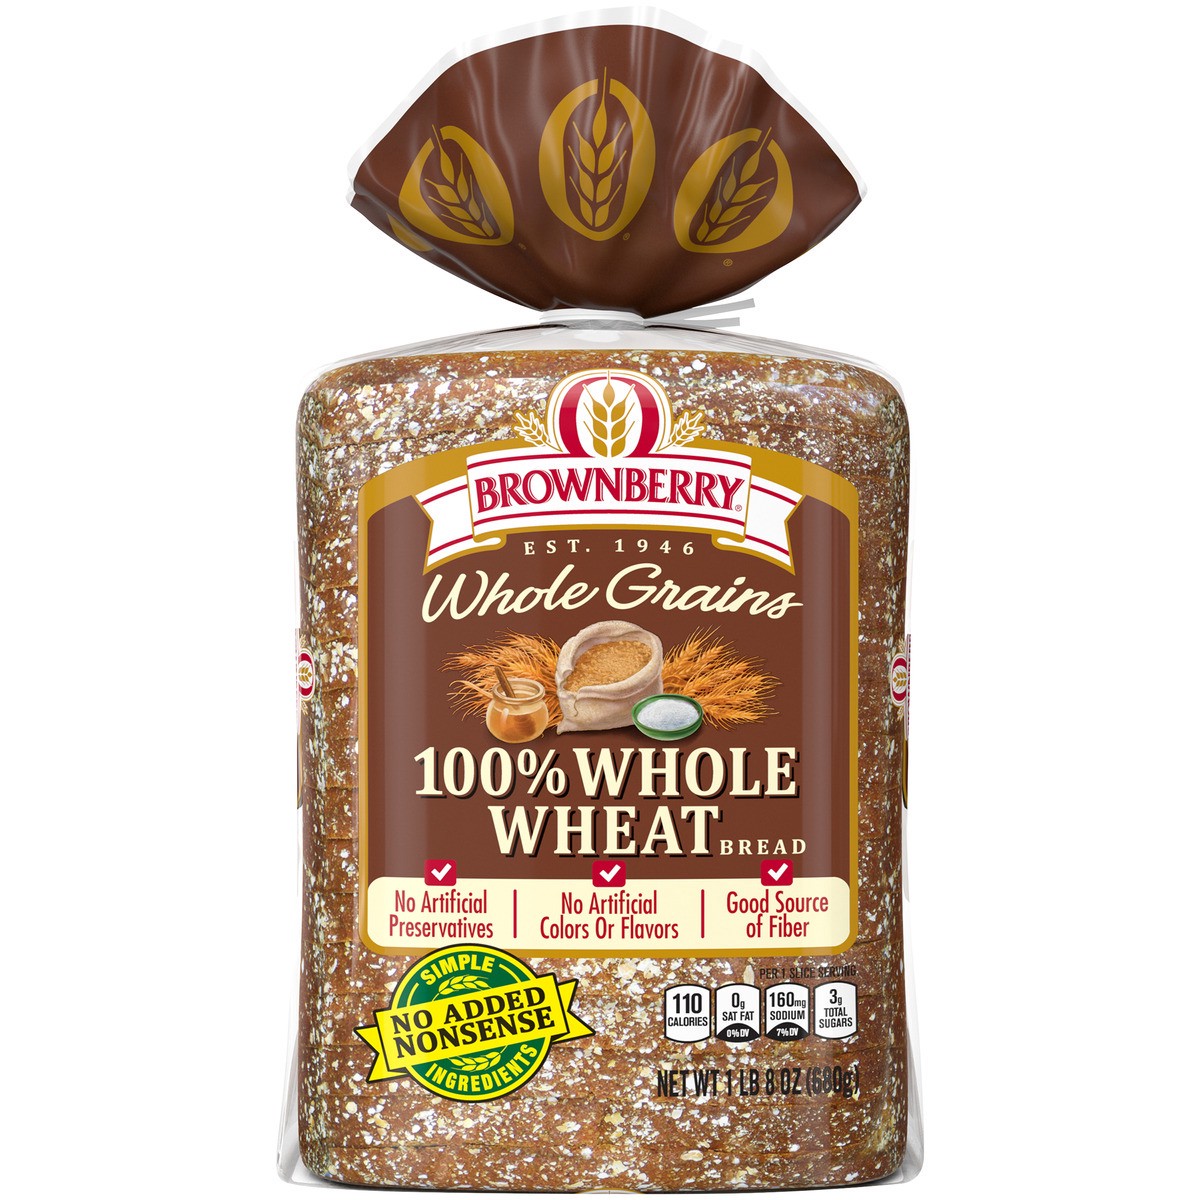 slide 1 of 23, Brownberry Whole Grains 100% Whole Wheat Bread, 24 oz, 1 ct